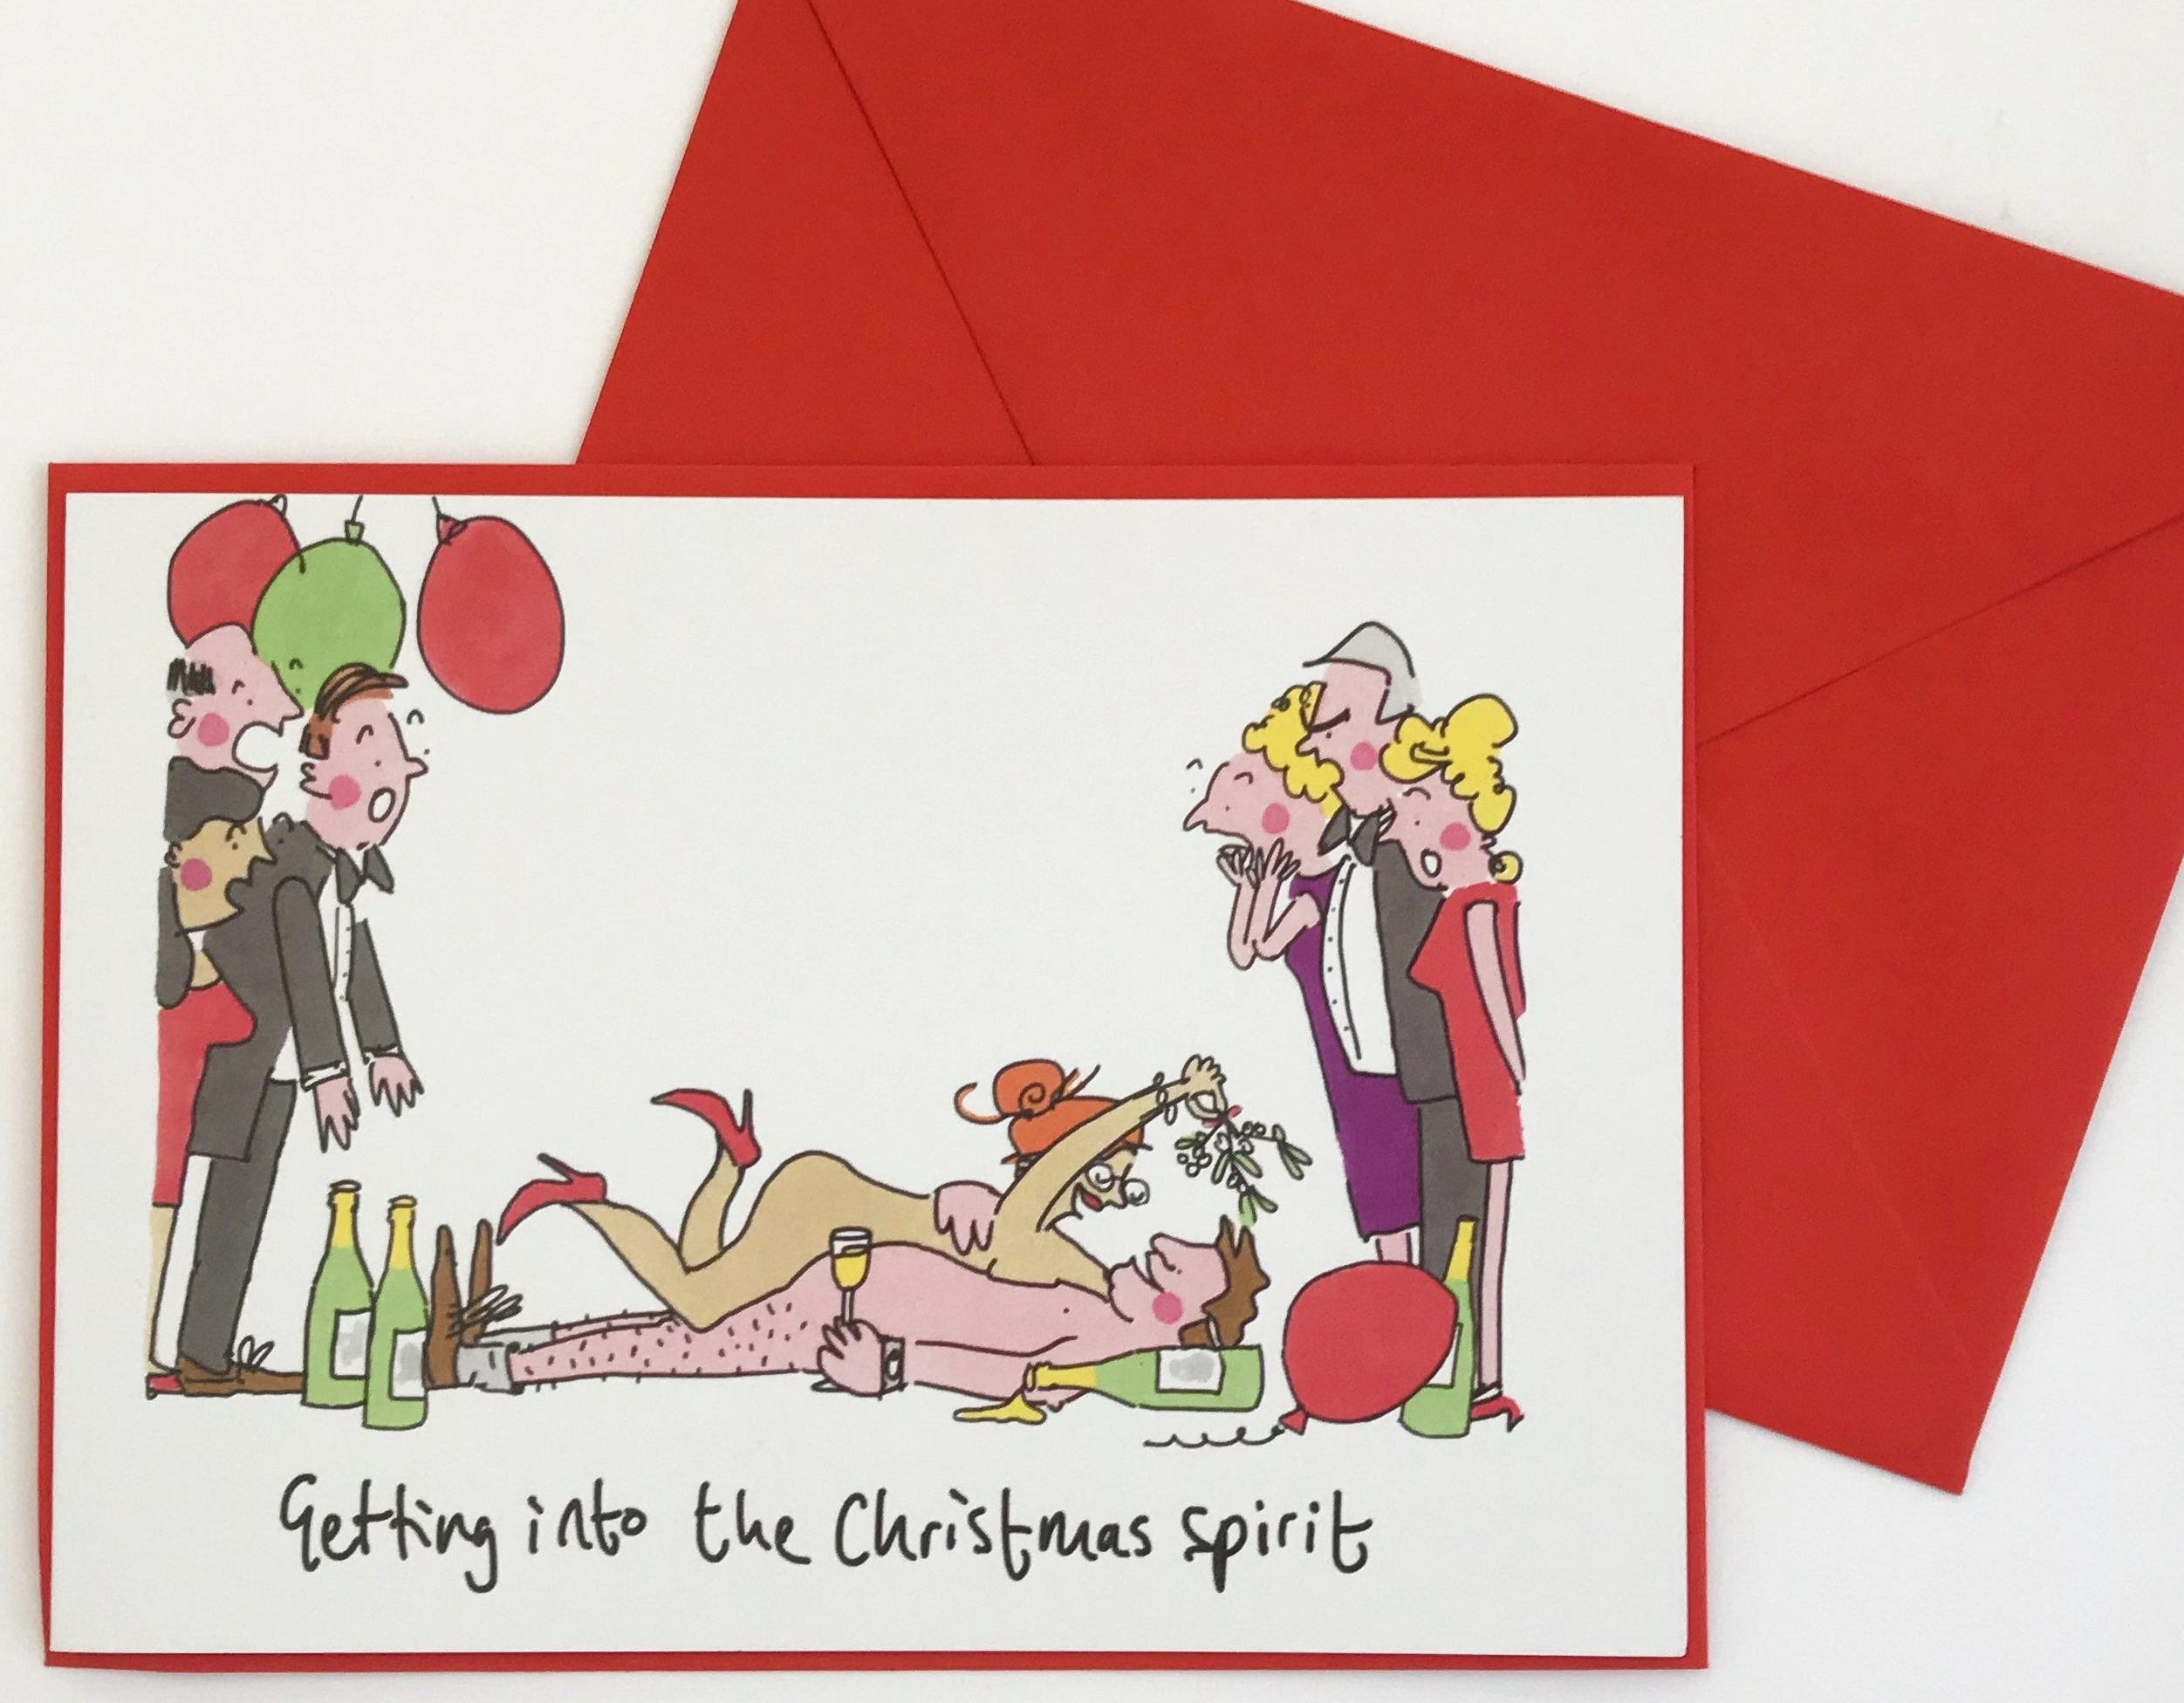 Off-the-peg Christmas cards